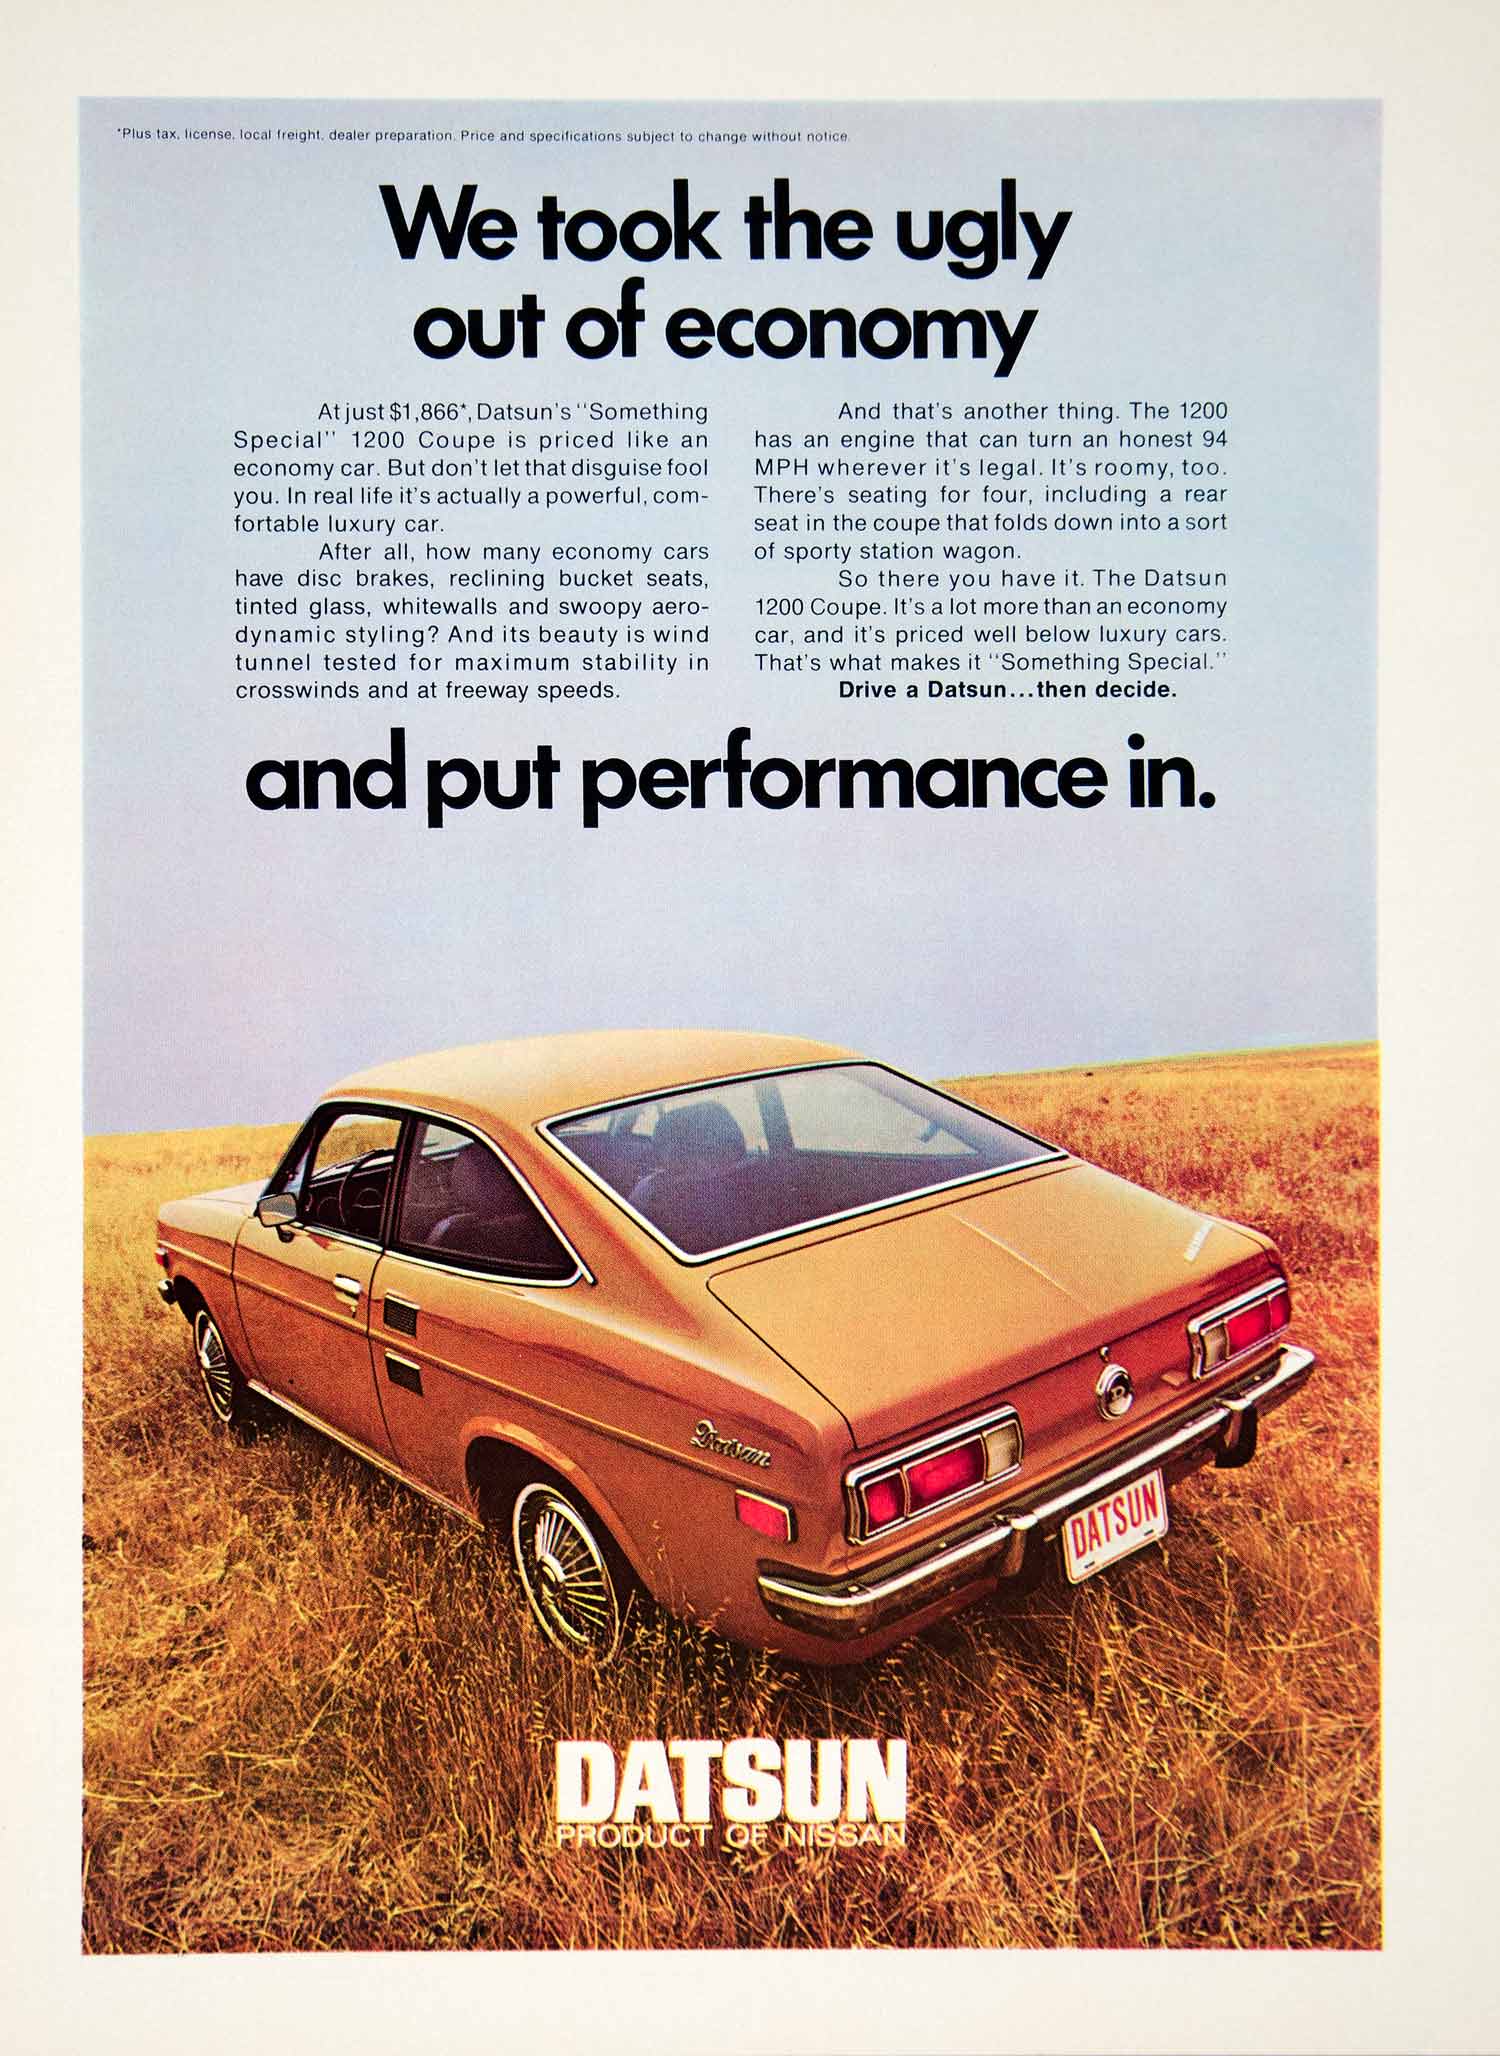 1971 Ad Datsun Nissan 1200 2 Door Coupe Compact Car Ugly Economy Automobile YCD8